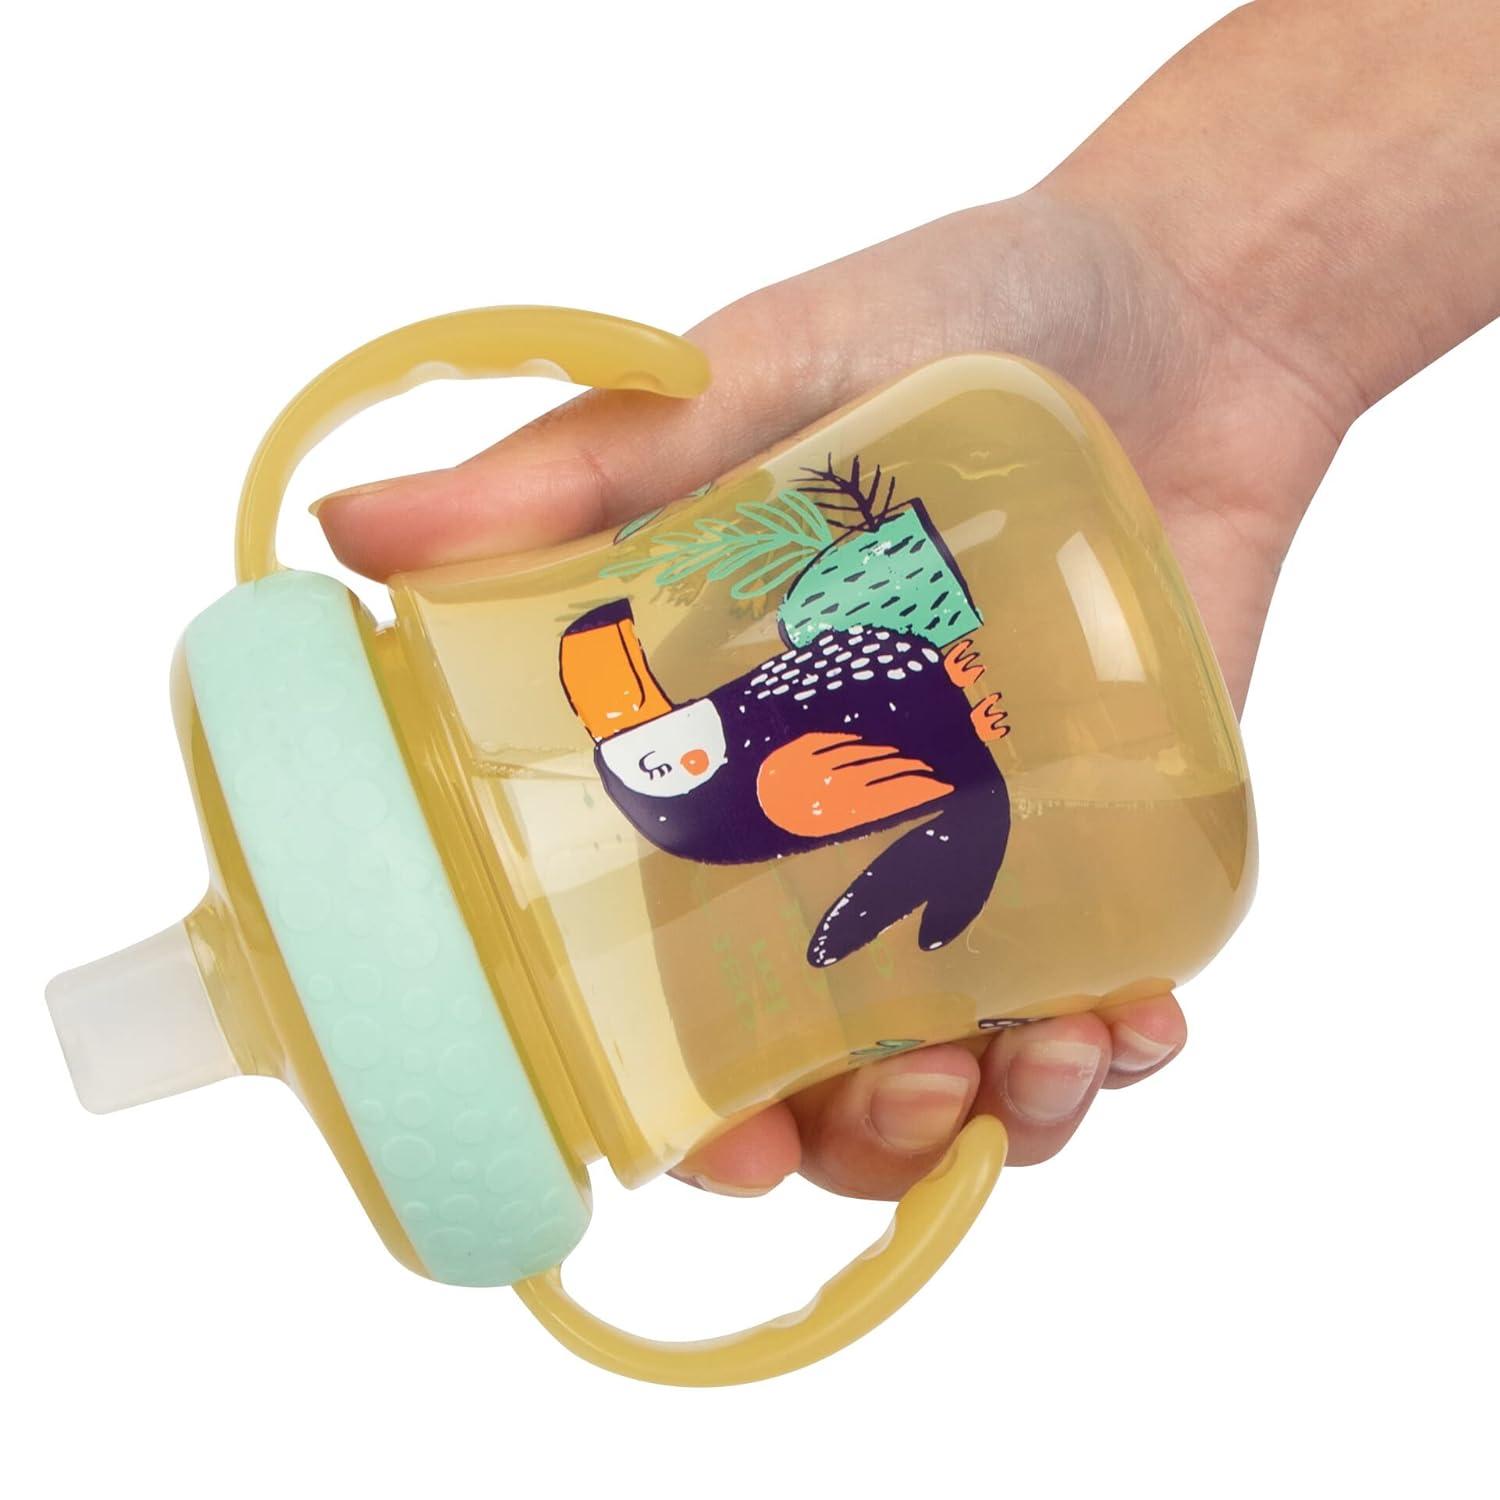 The First Years The First Years Soft Spout Sippy Cups 